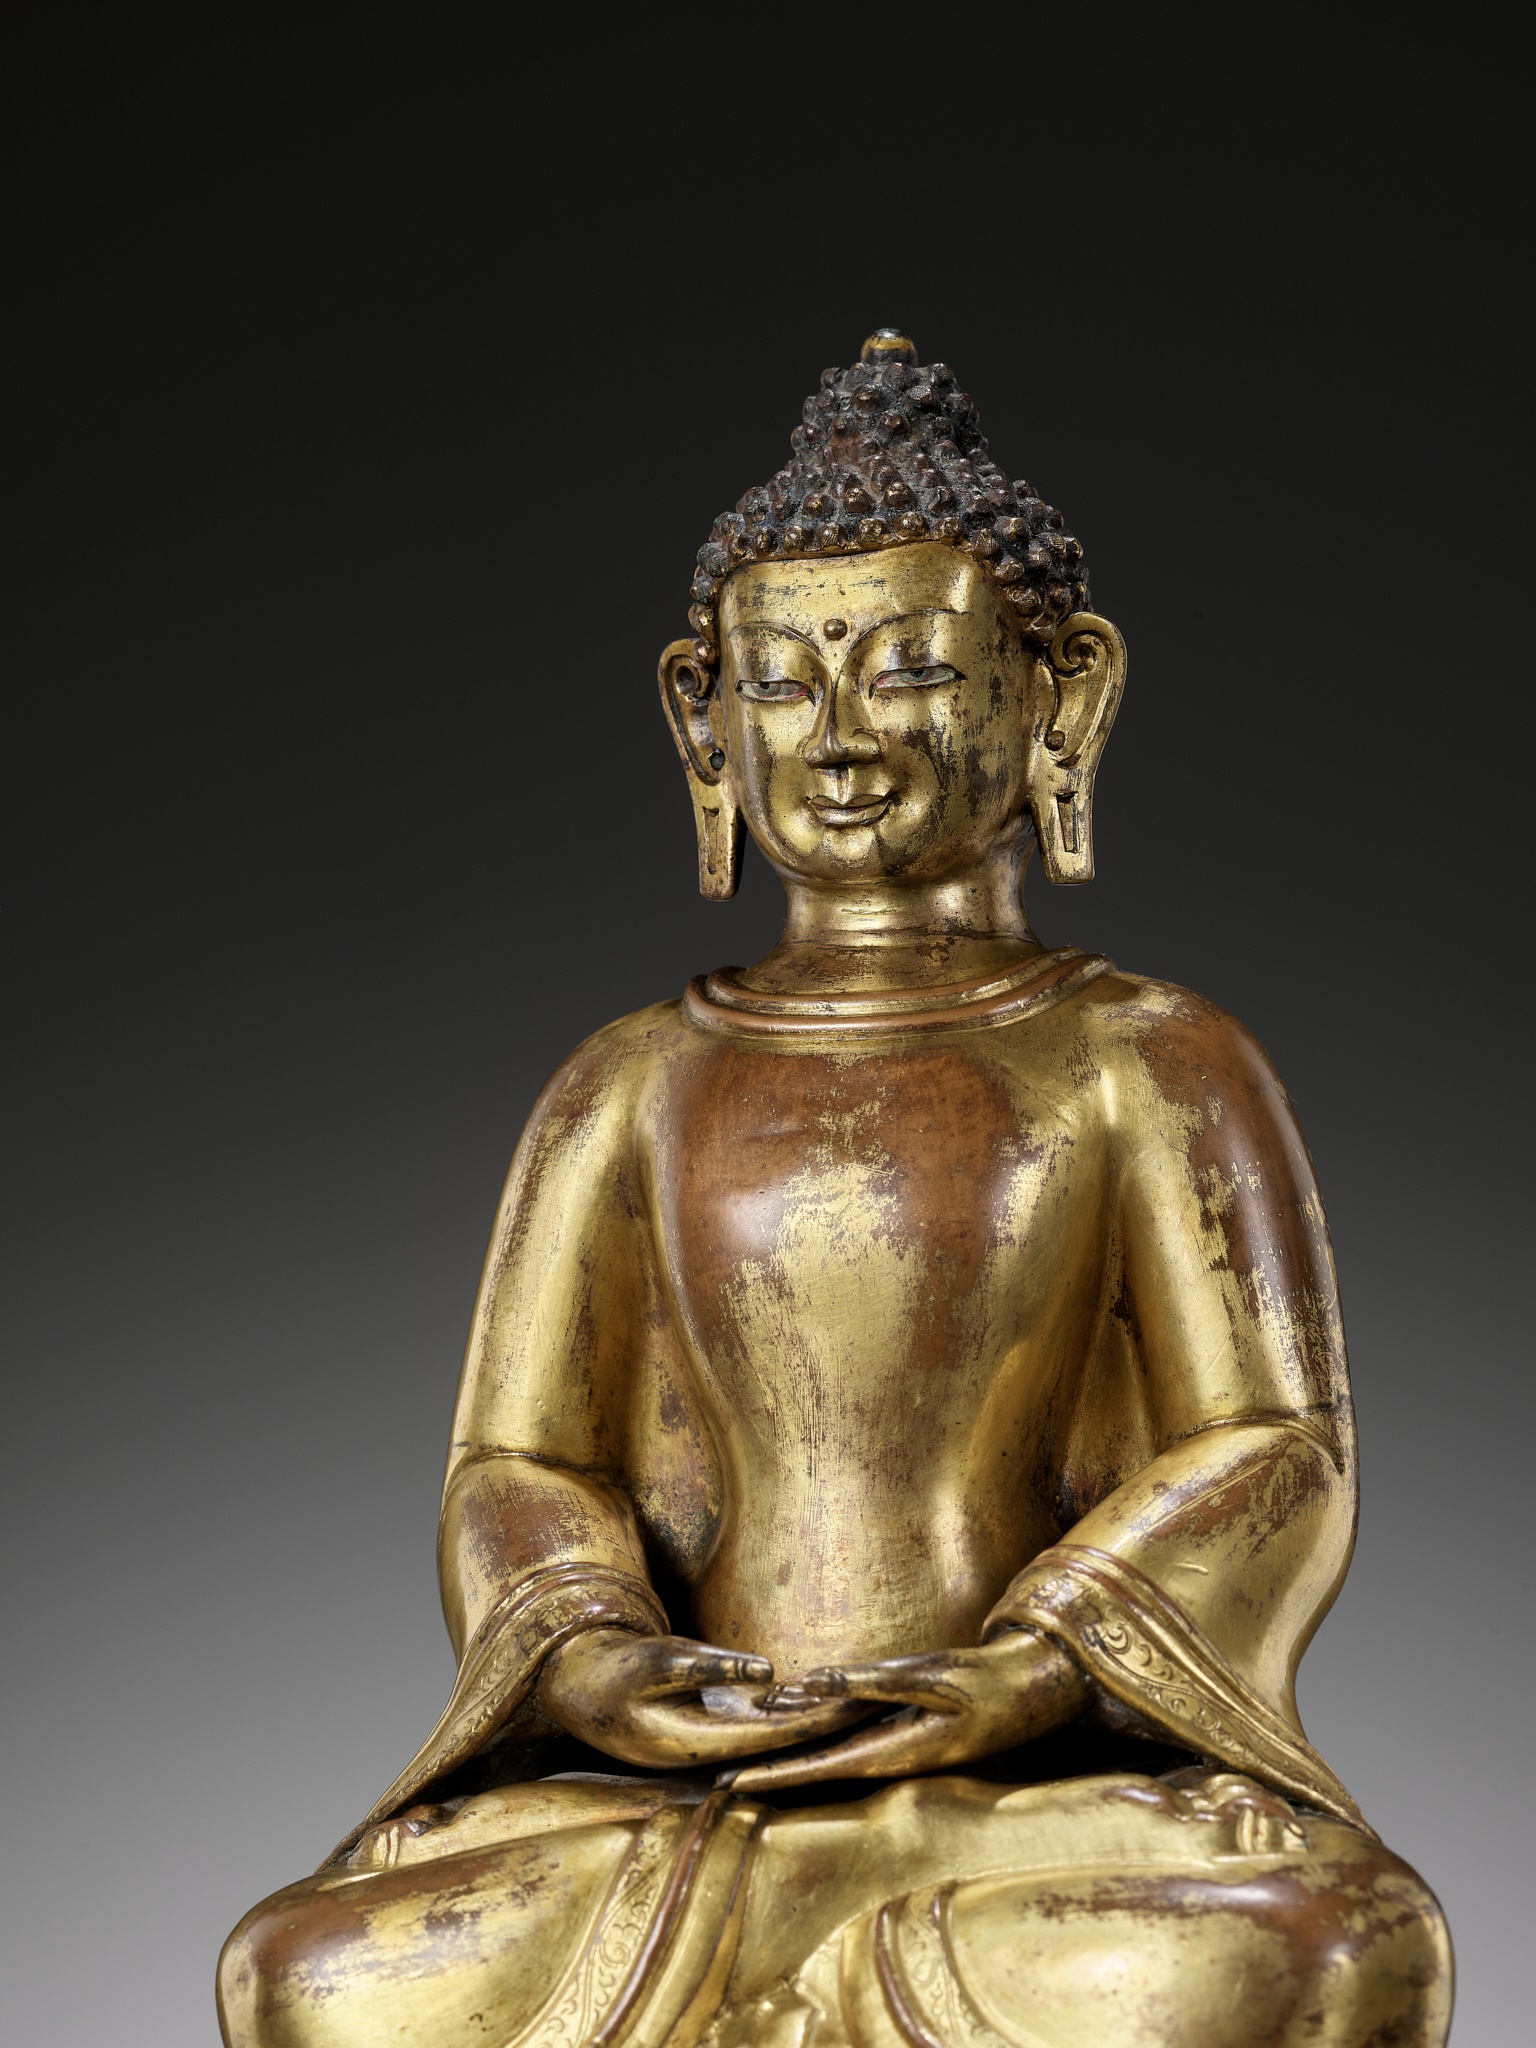 A GILT COPPER-ALLOY REPOUSSE FIGURE OF BUDDHA AMITABHA, WITH AN INSCRIPTION REFERRING TO THE SECOND - Image 8 of 16